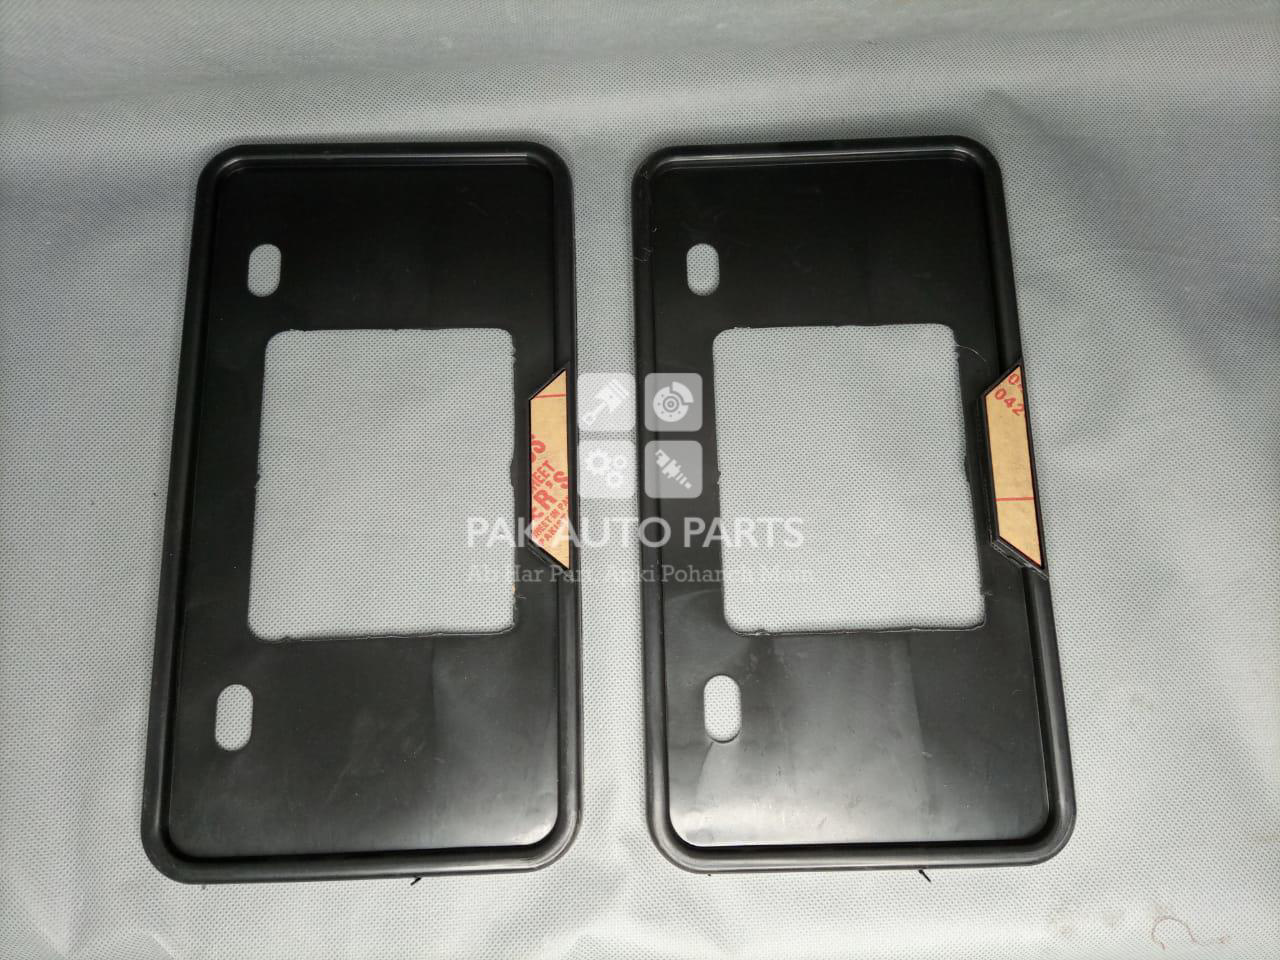 Picture of Number Plate Frame Set, Plastic (2PCs)